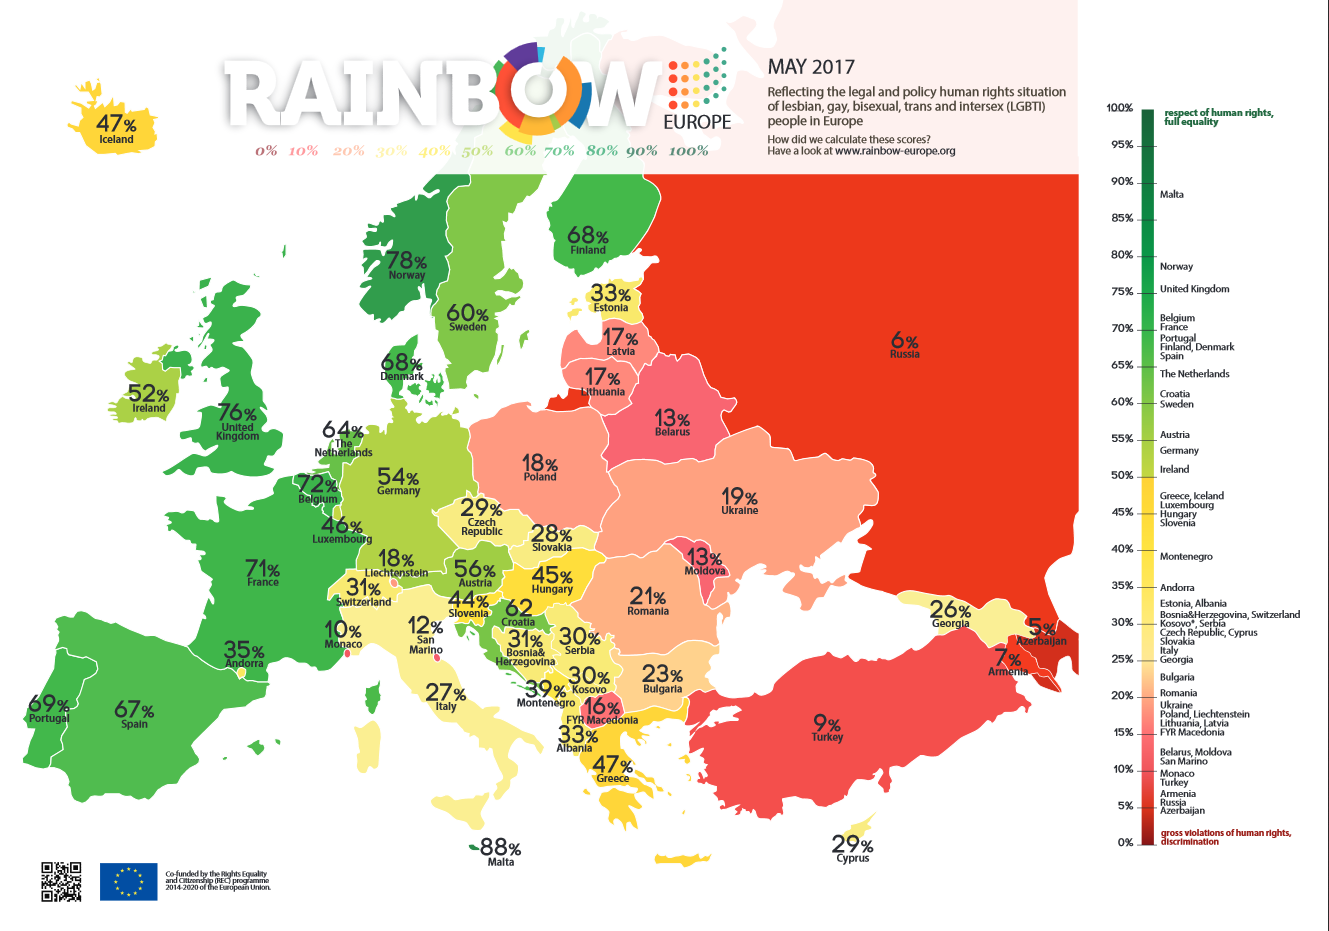 Rainbow Index 2017: Belarus remains more homophobic than most countries in Europe